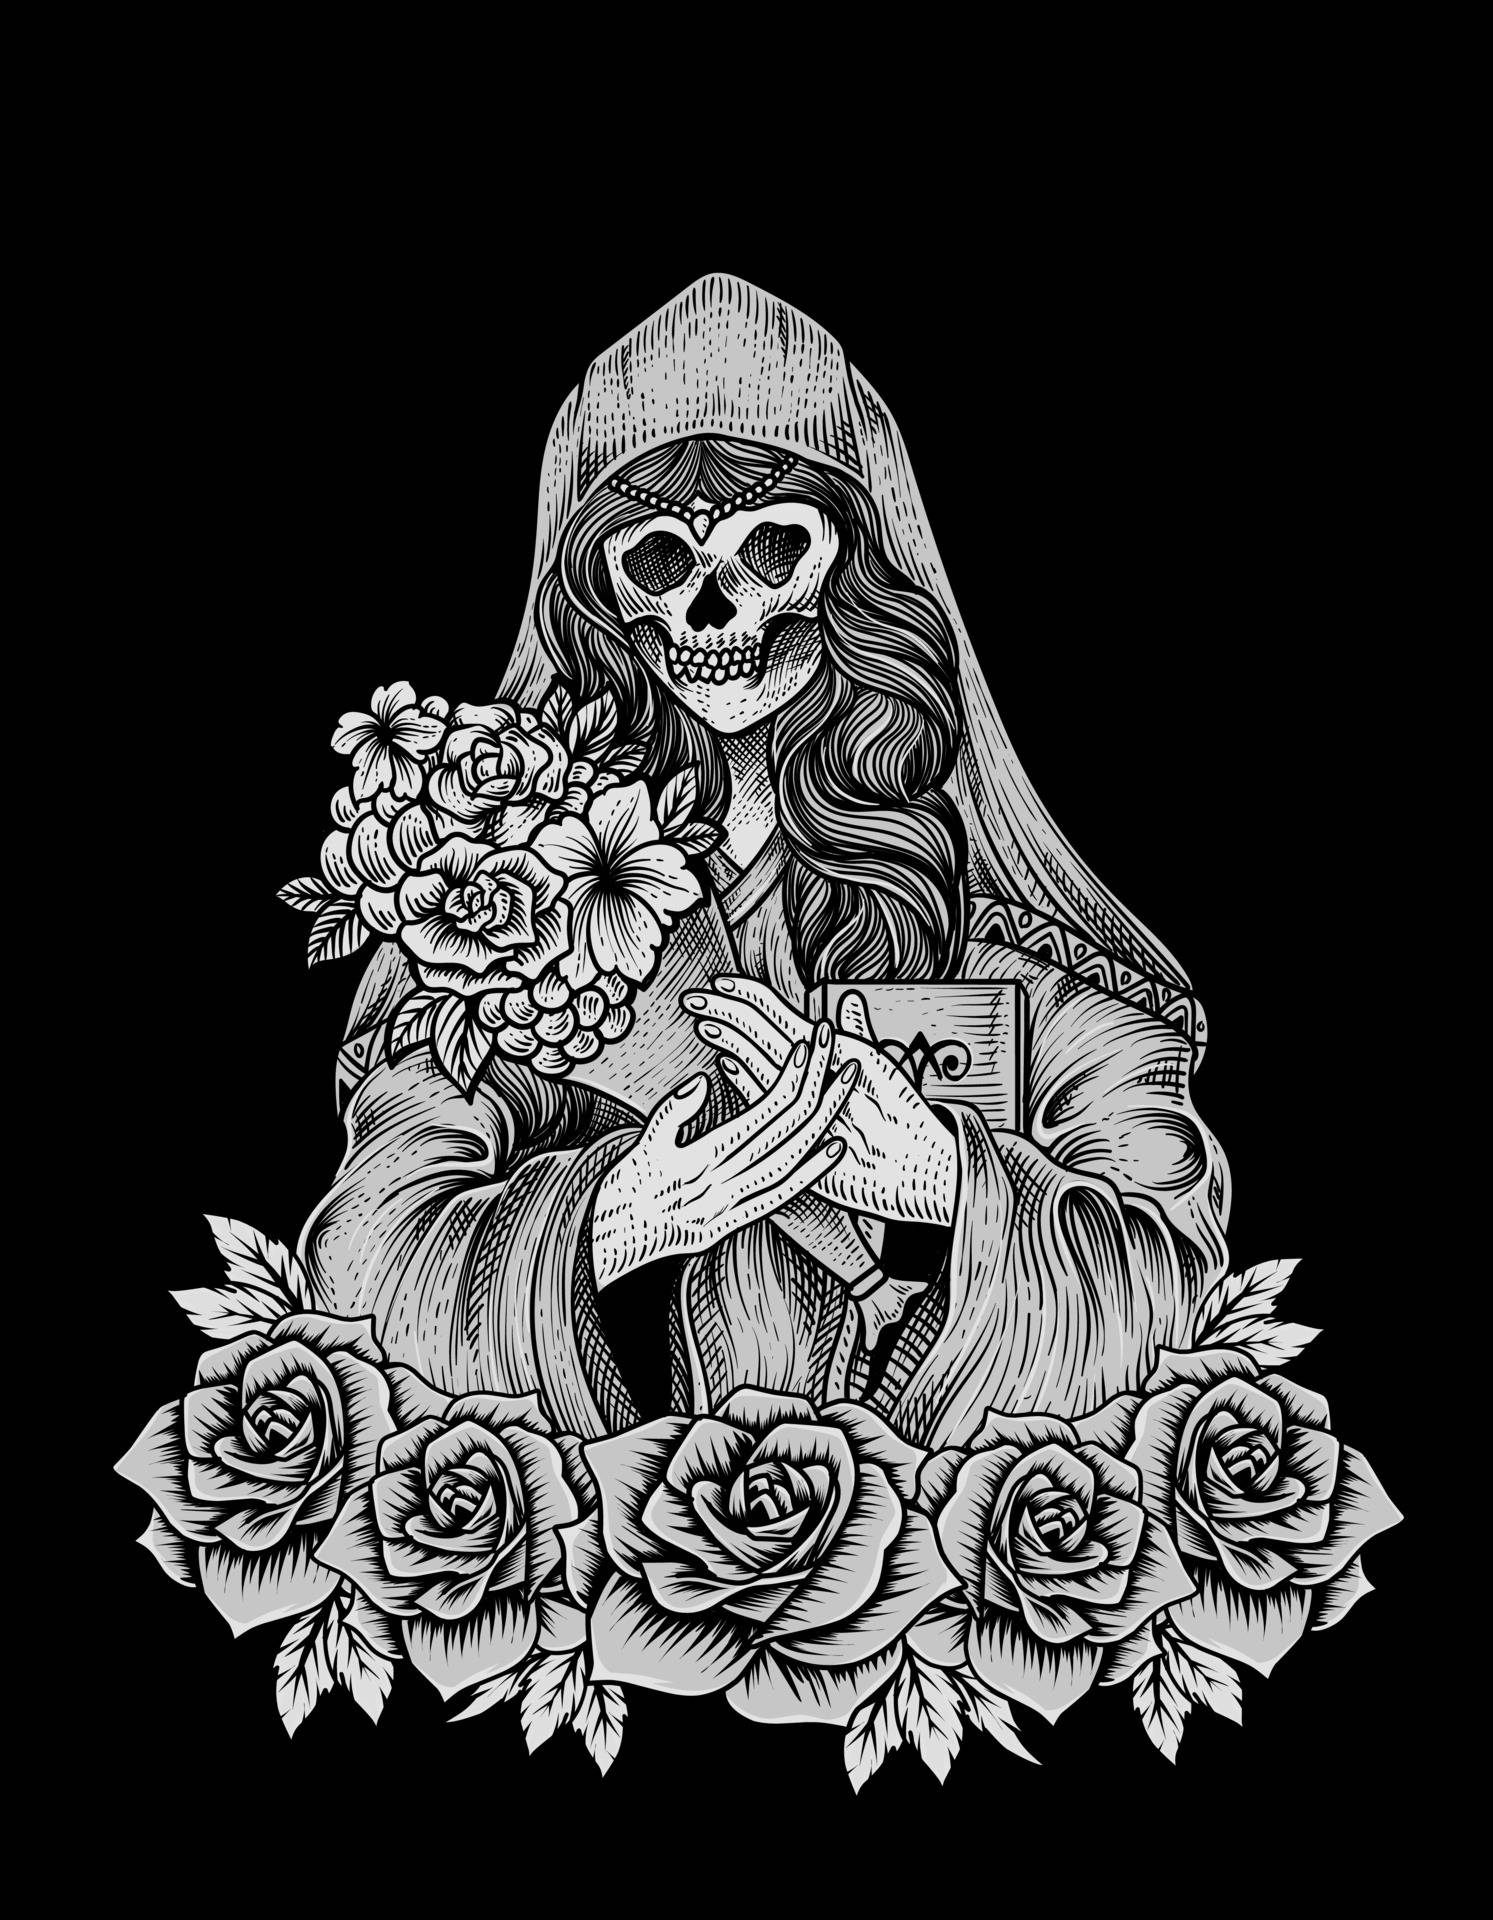 A Skeleton Holding Roses And A Skull Wallpaper